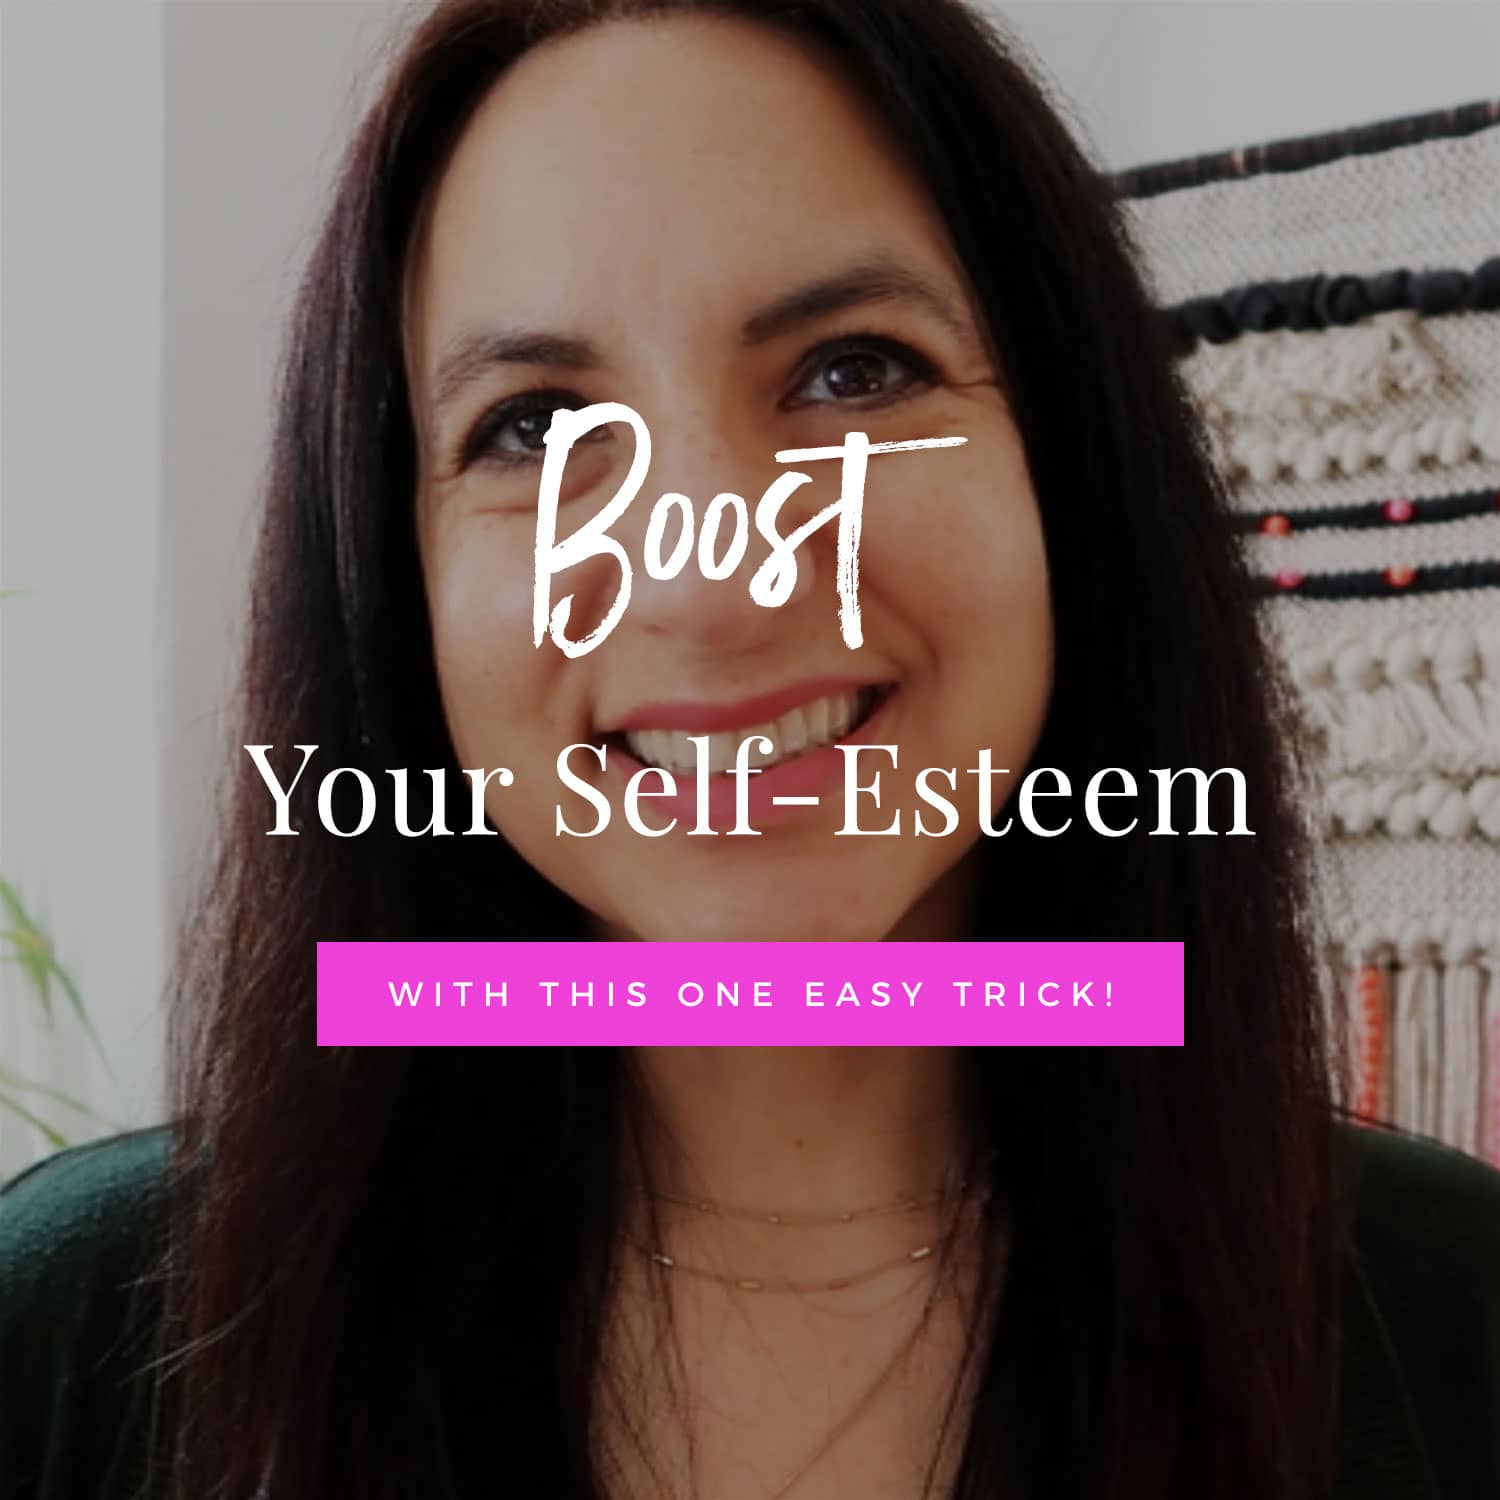 Boost Your Self-Esteem With This One Trick!